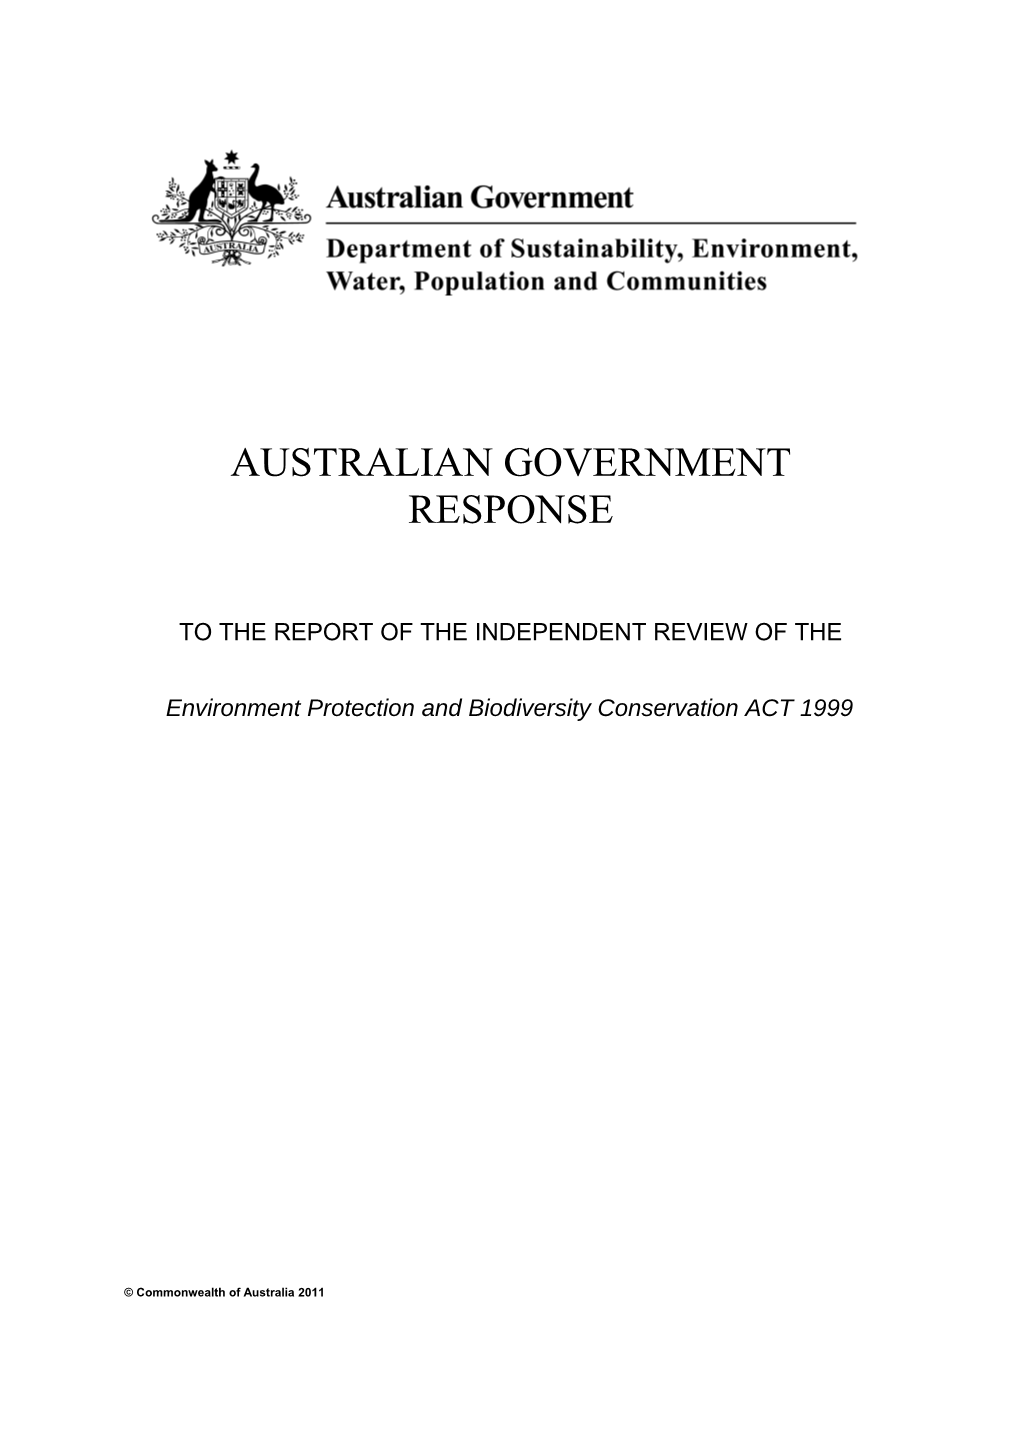 Australian Government Response to the Report of the Independent Review of the Environment